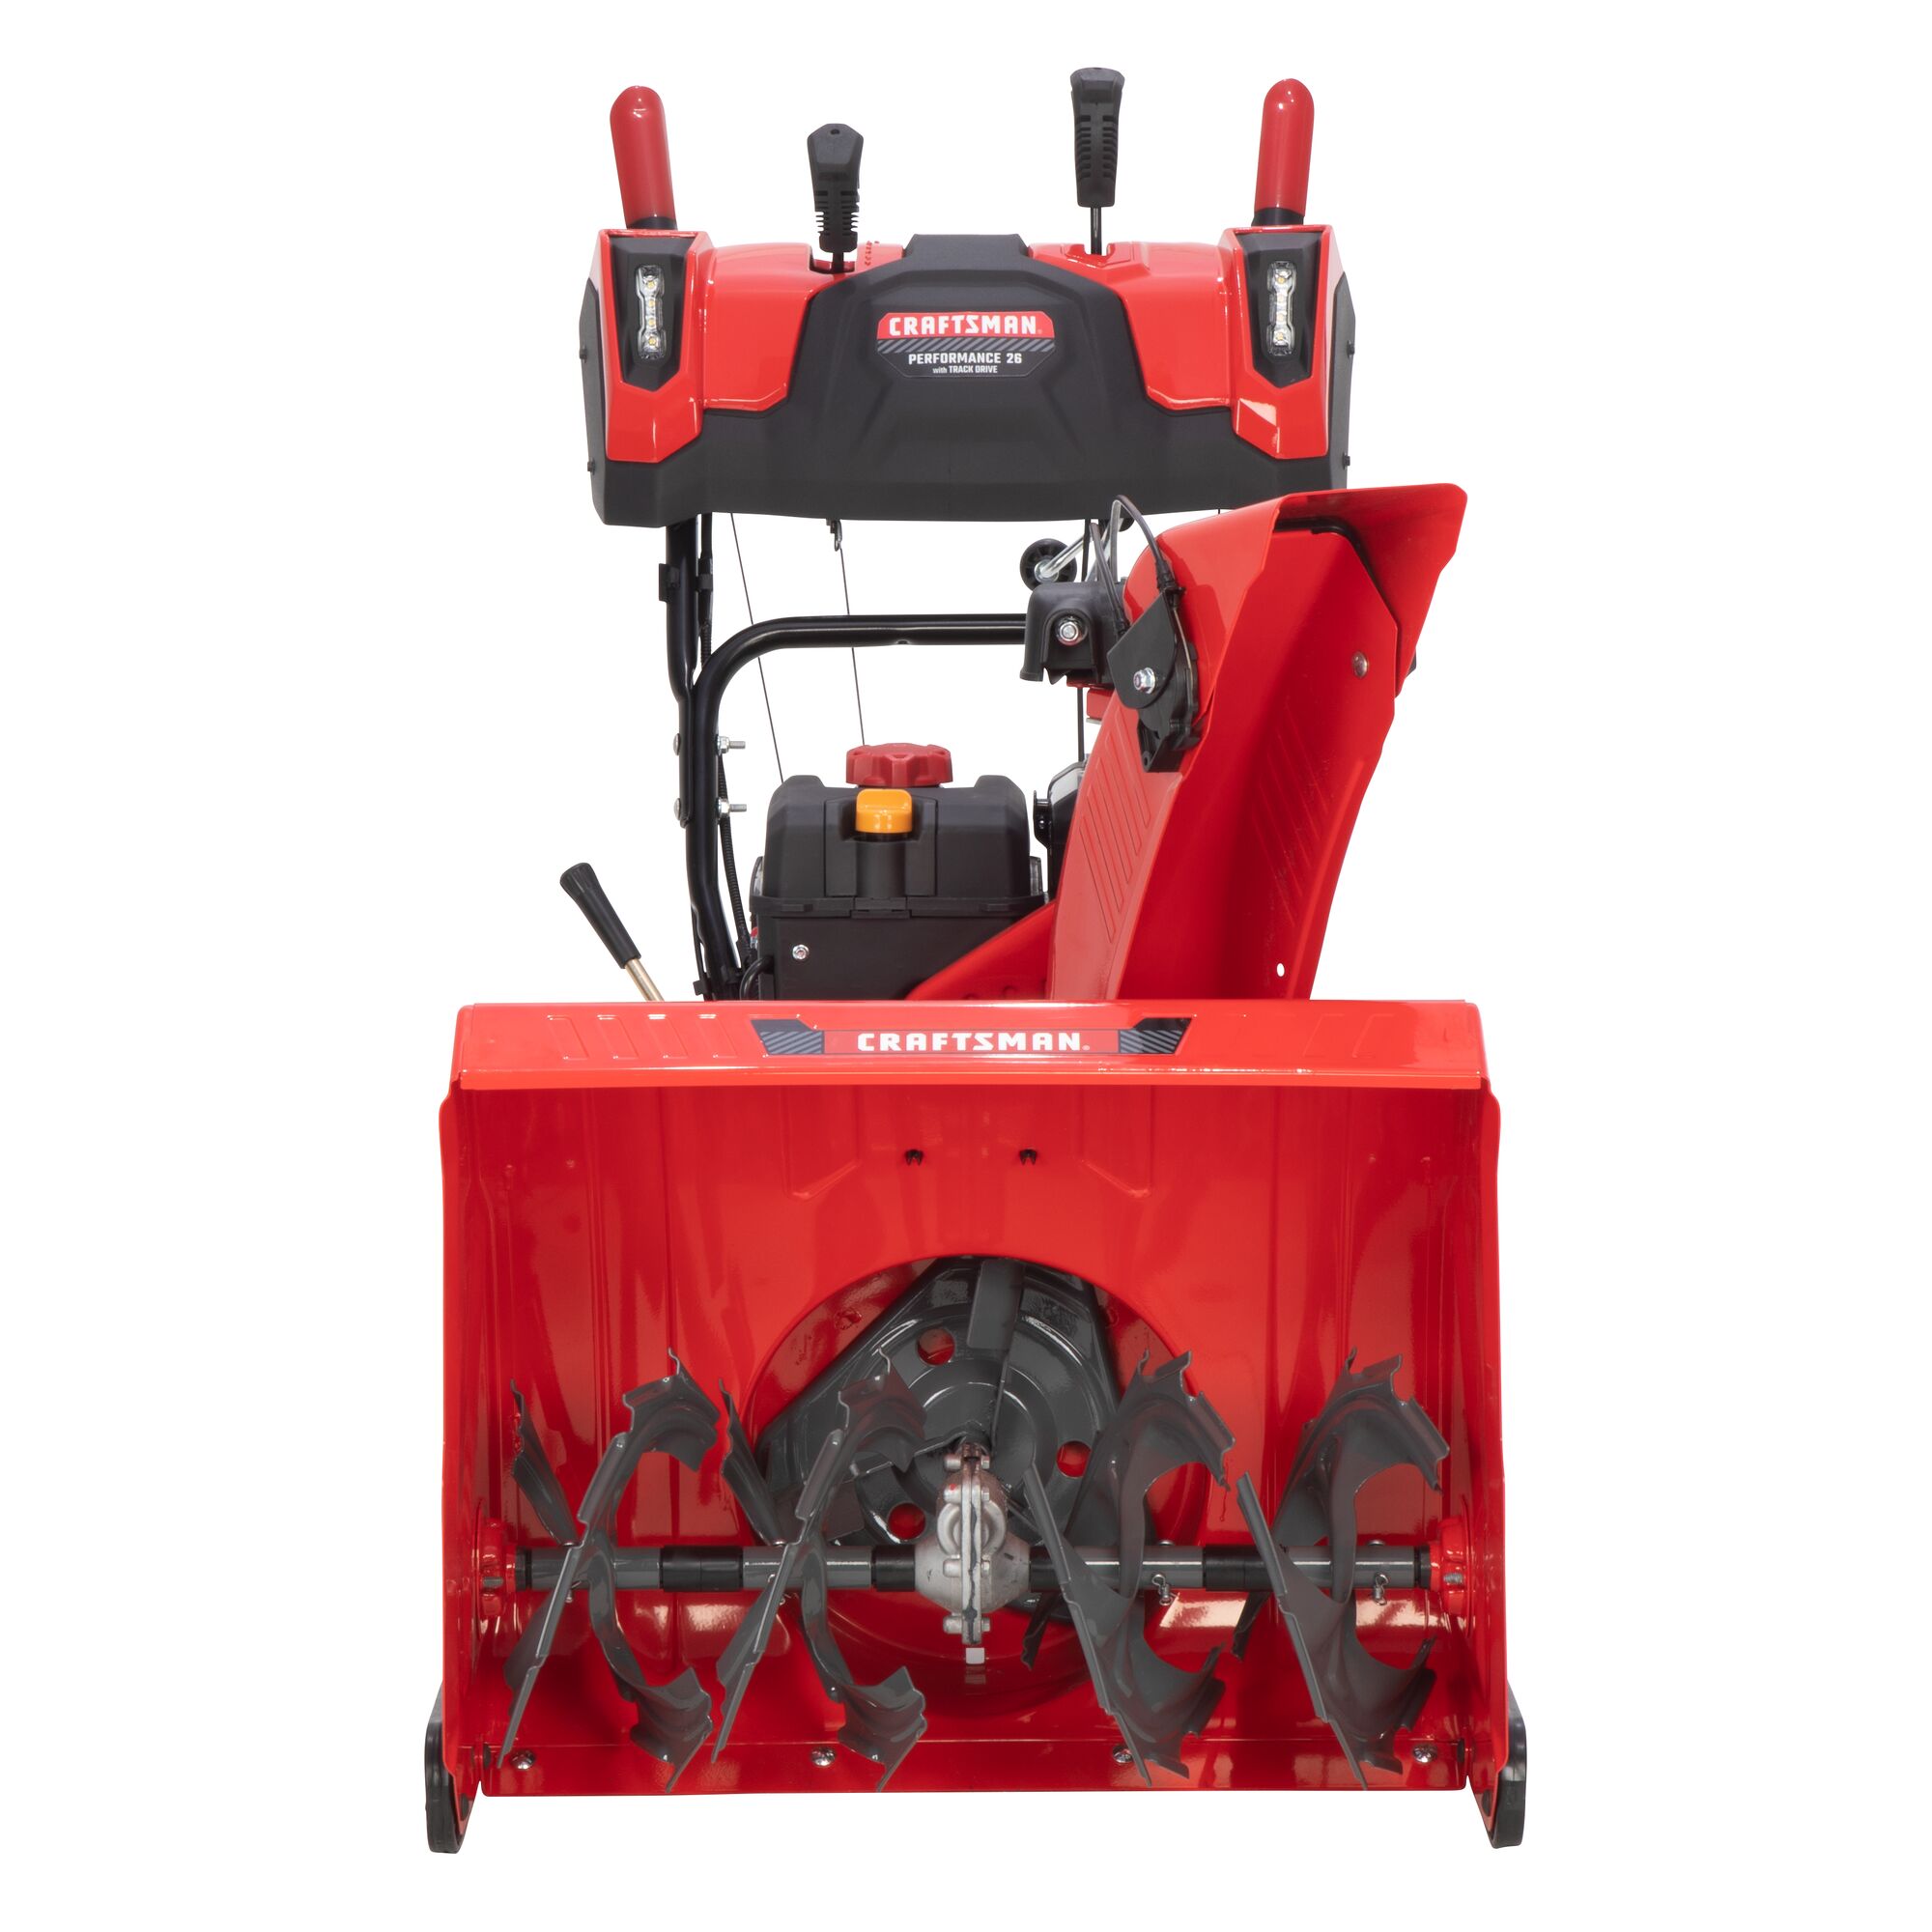 CRAFTSMAN Performance 26 Track Two-Stage Gas Snow Blower on white background